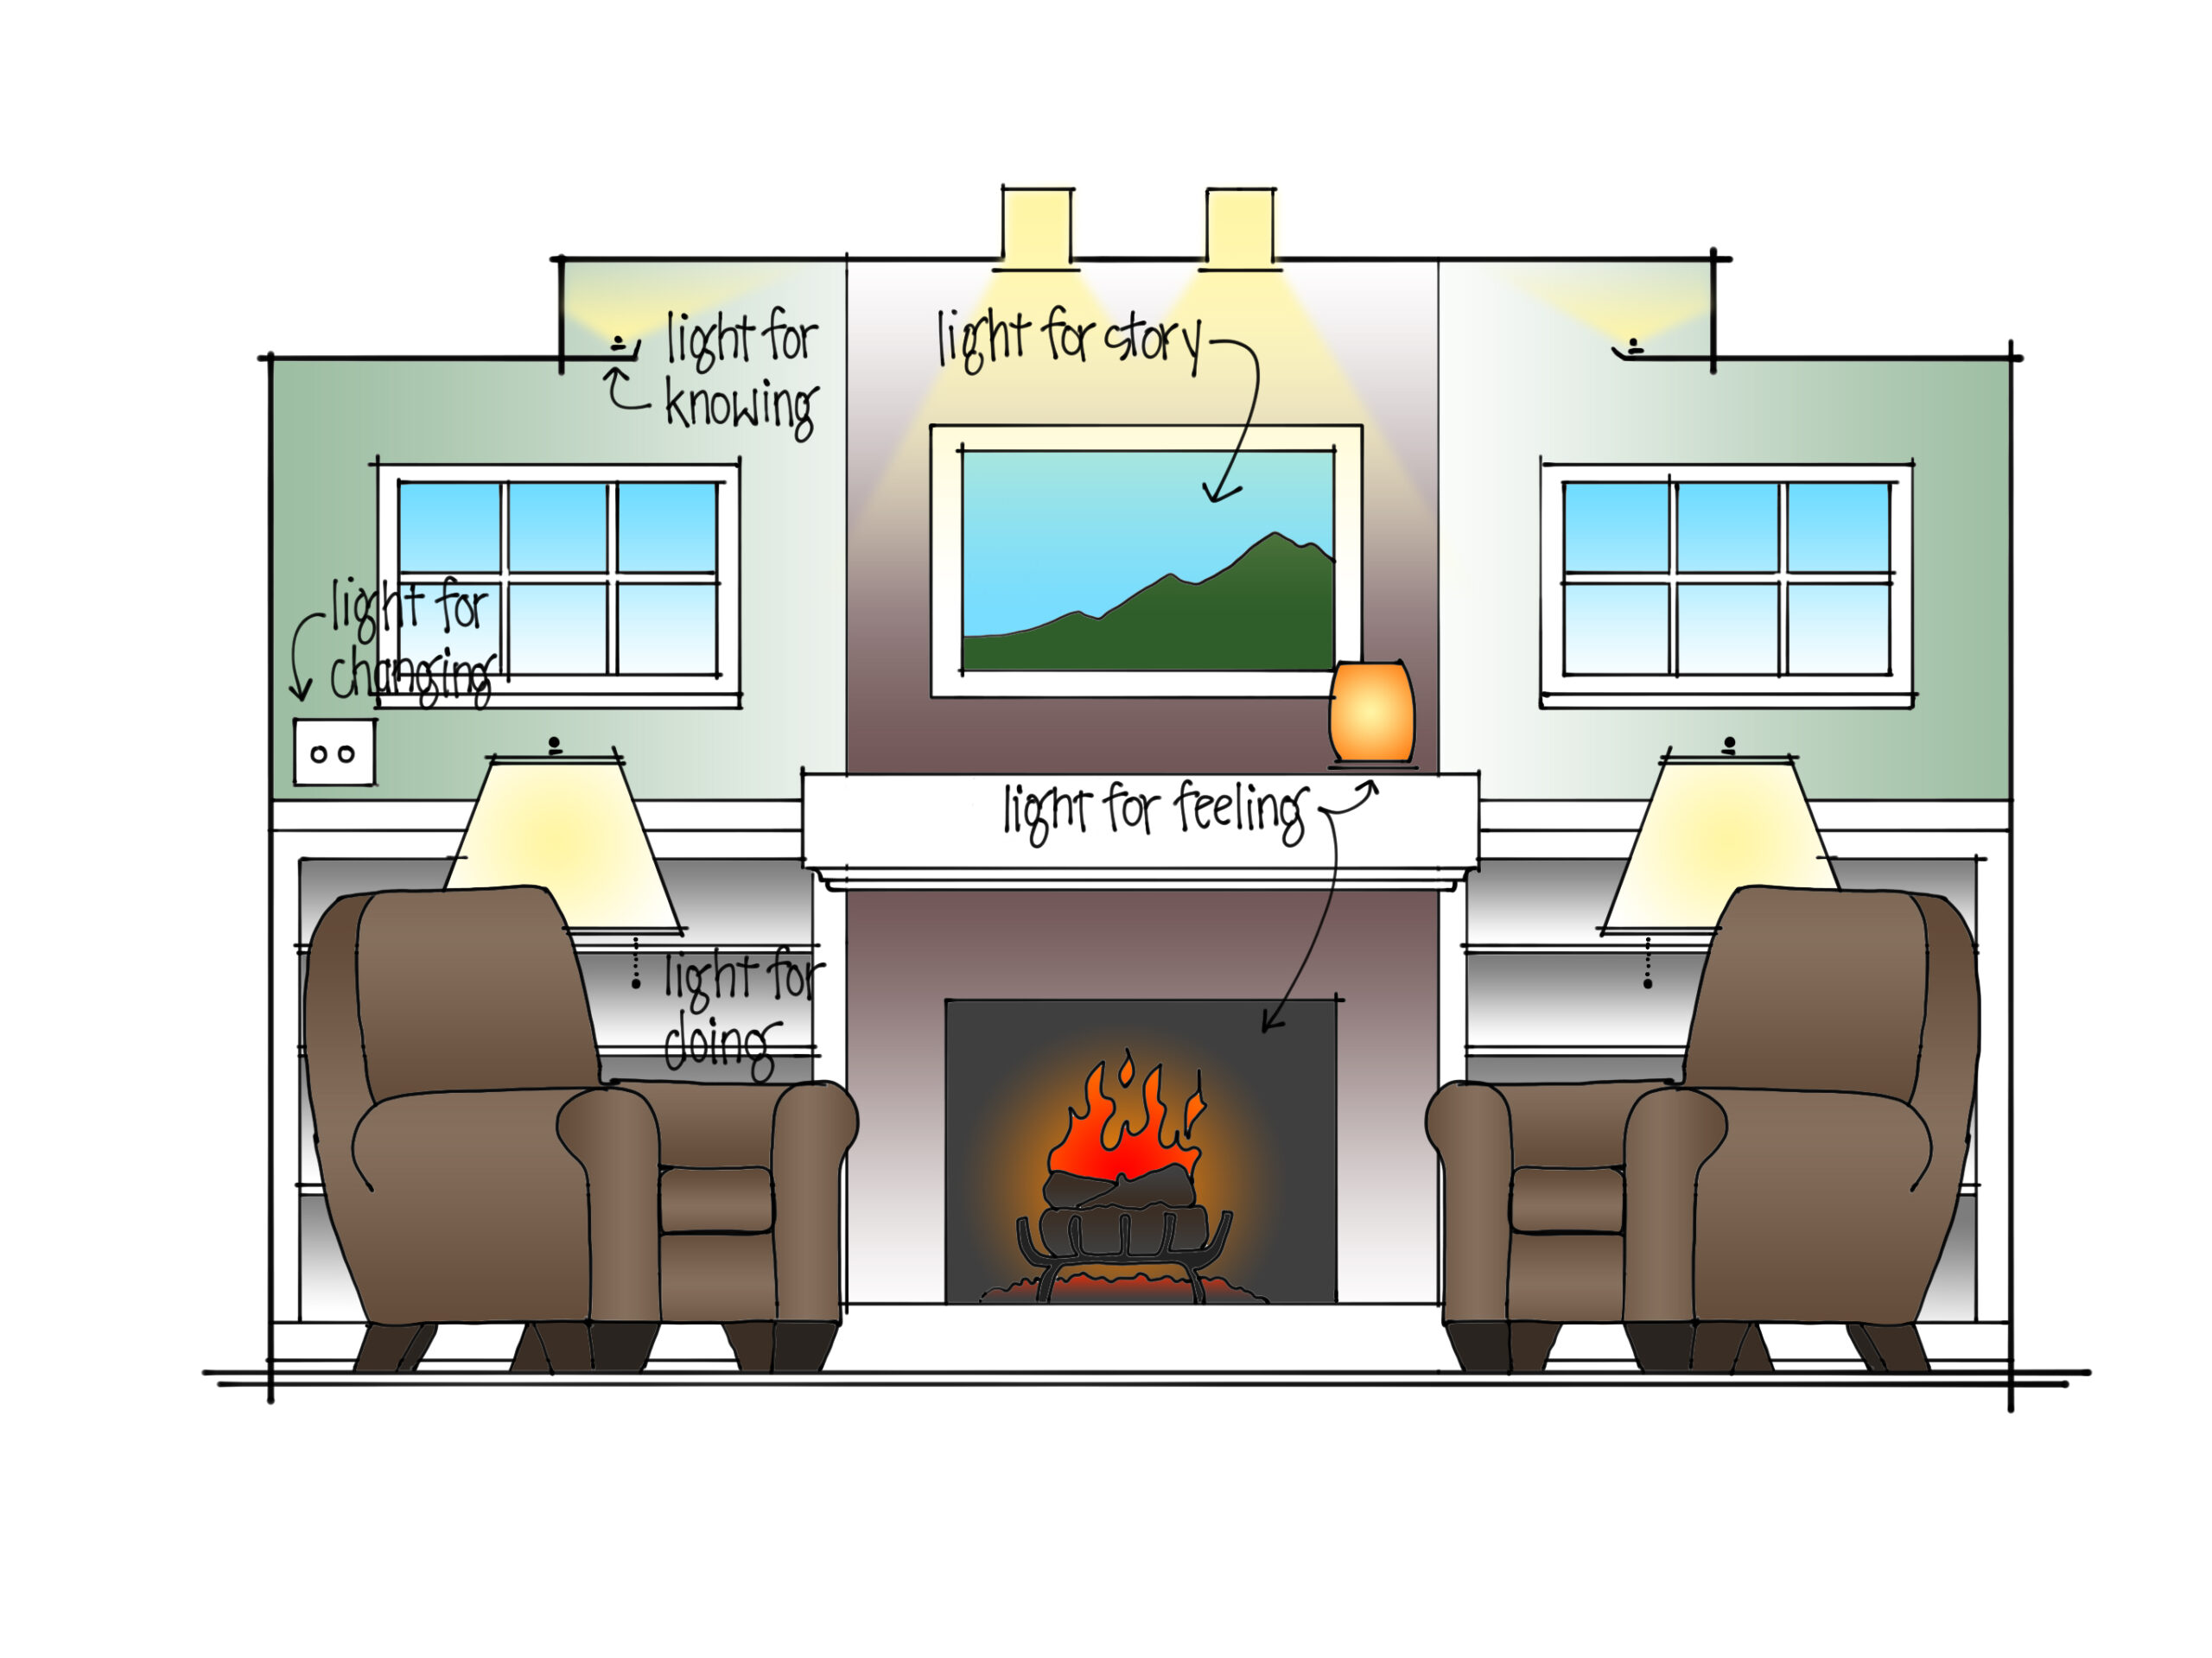 An illustrated diagram of a living room featuring a fireplace and mangle, two windows, and two easy chairs facing each other. "Light for knowing" labels a light fixture against the wall. "Light for story" labels the light pointed at a picture. "Light for changing" labels a light switch. "Light for doing" labels a lamp by a chair. "Light for feeling" labels the fire in the fireplace and a lamp on the mantle.